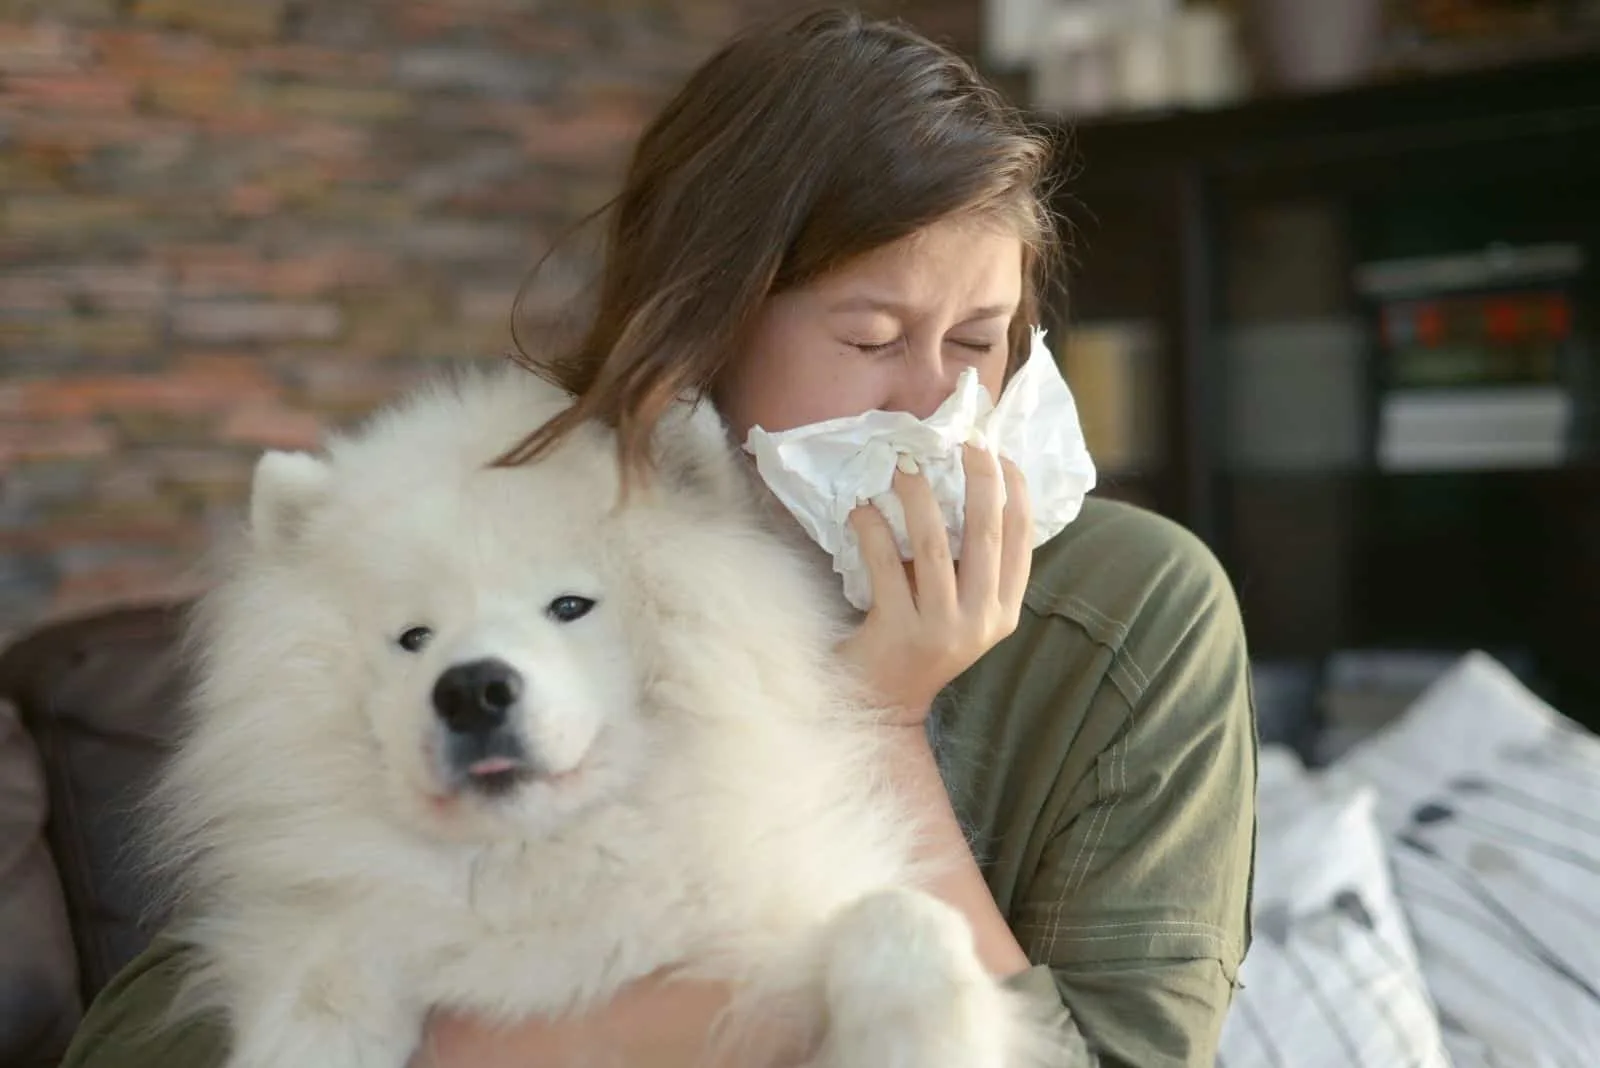 woman with allergies sneezing carrying a furry white dog